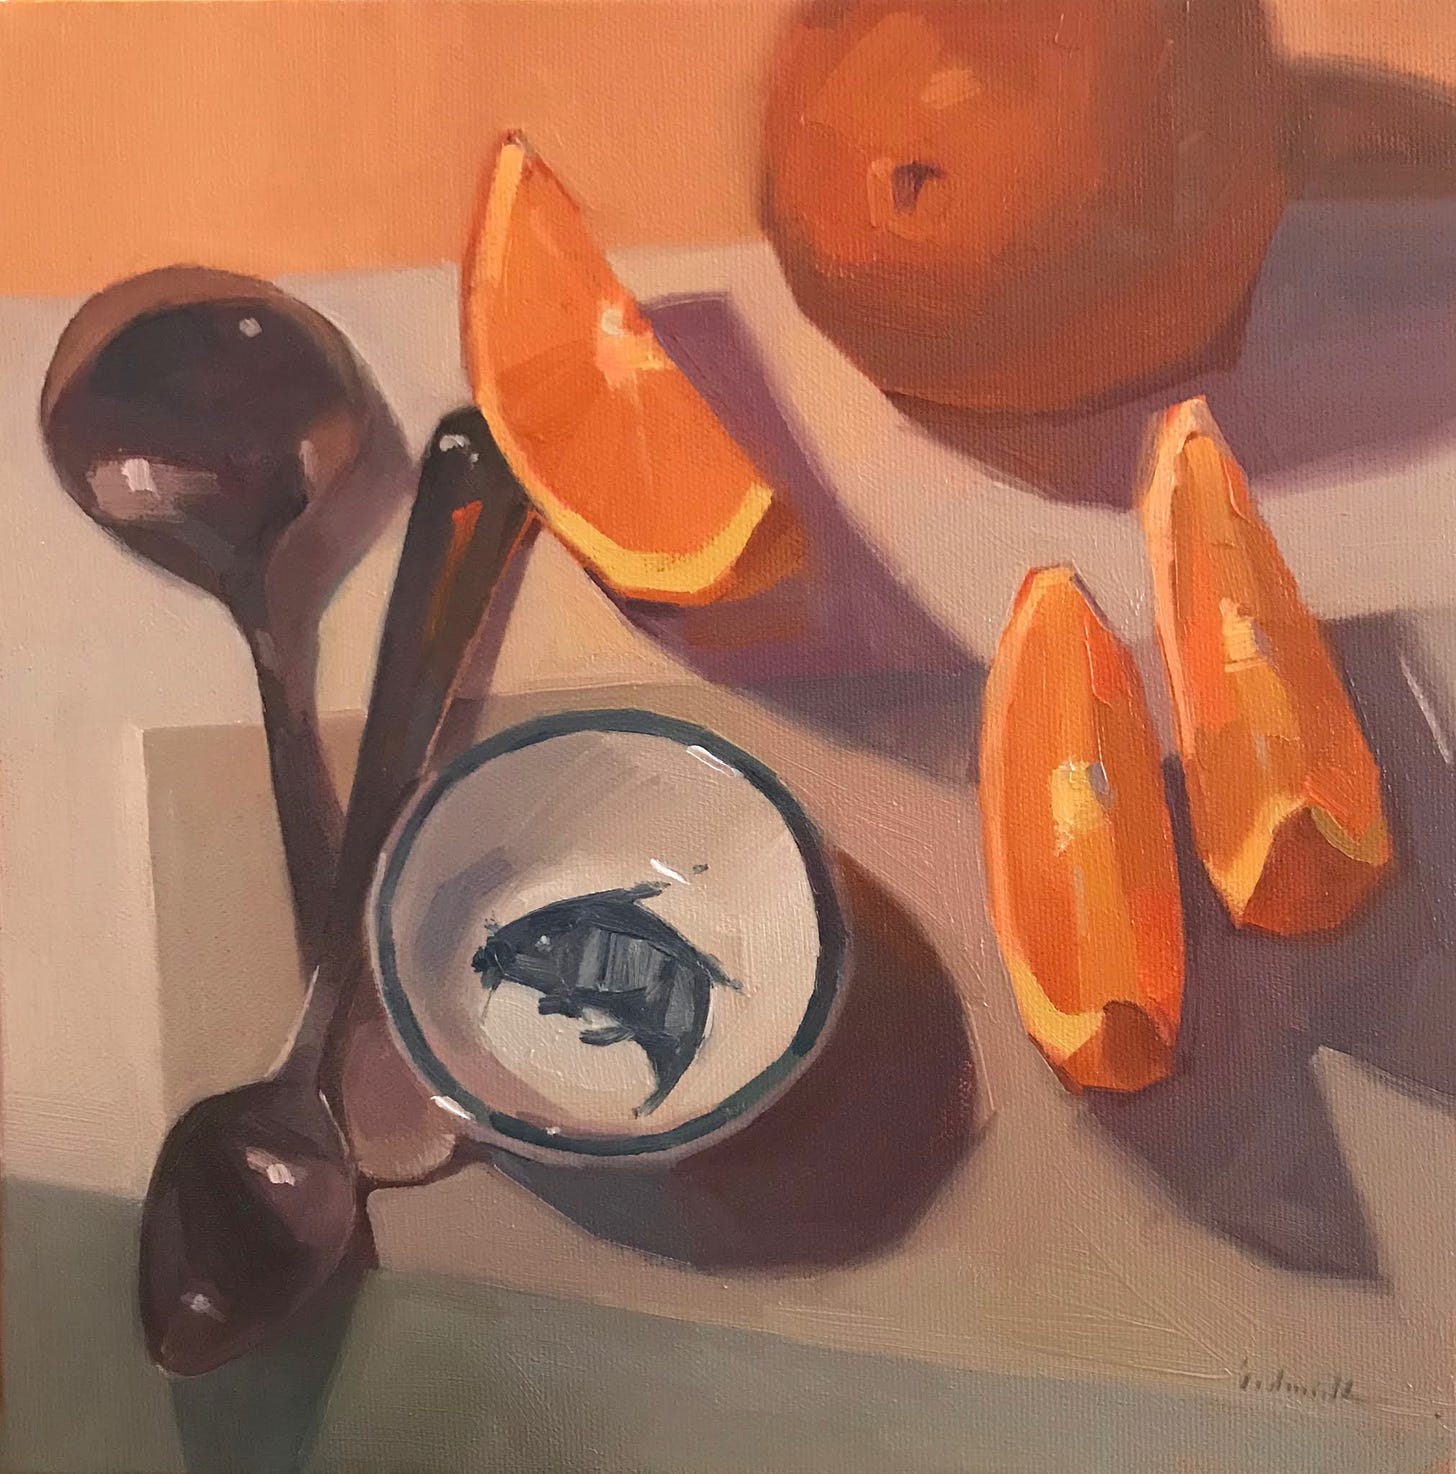 Painting the Dynamic Still Life with Sarah Sedwick – 2020 – Painting miles